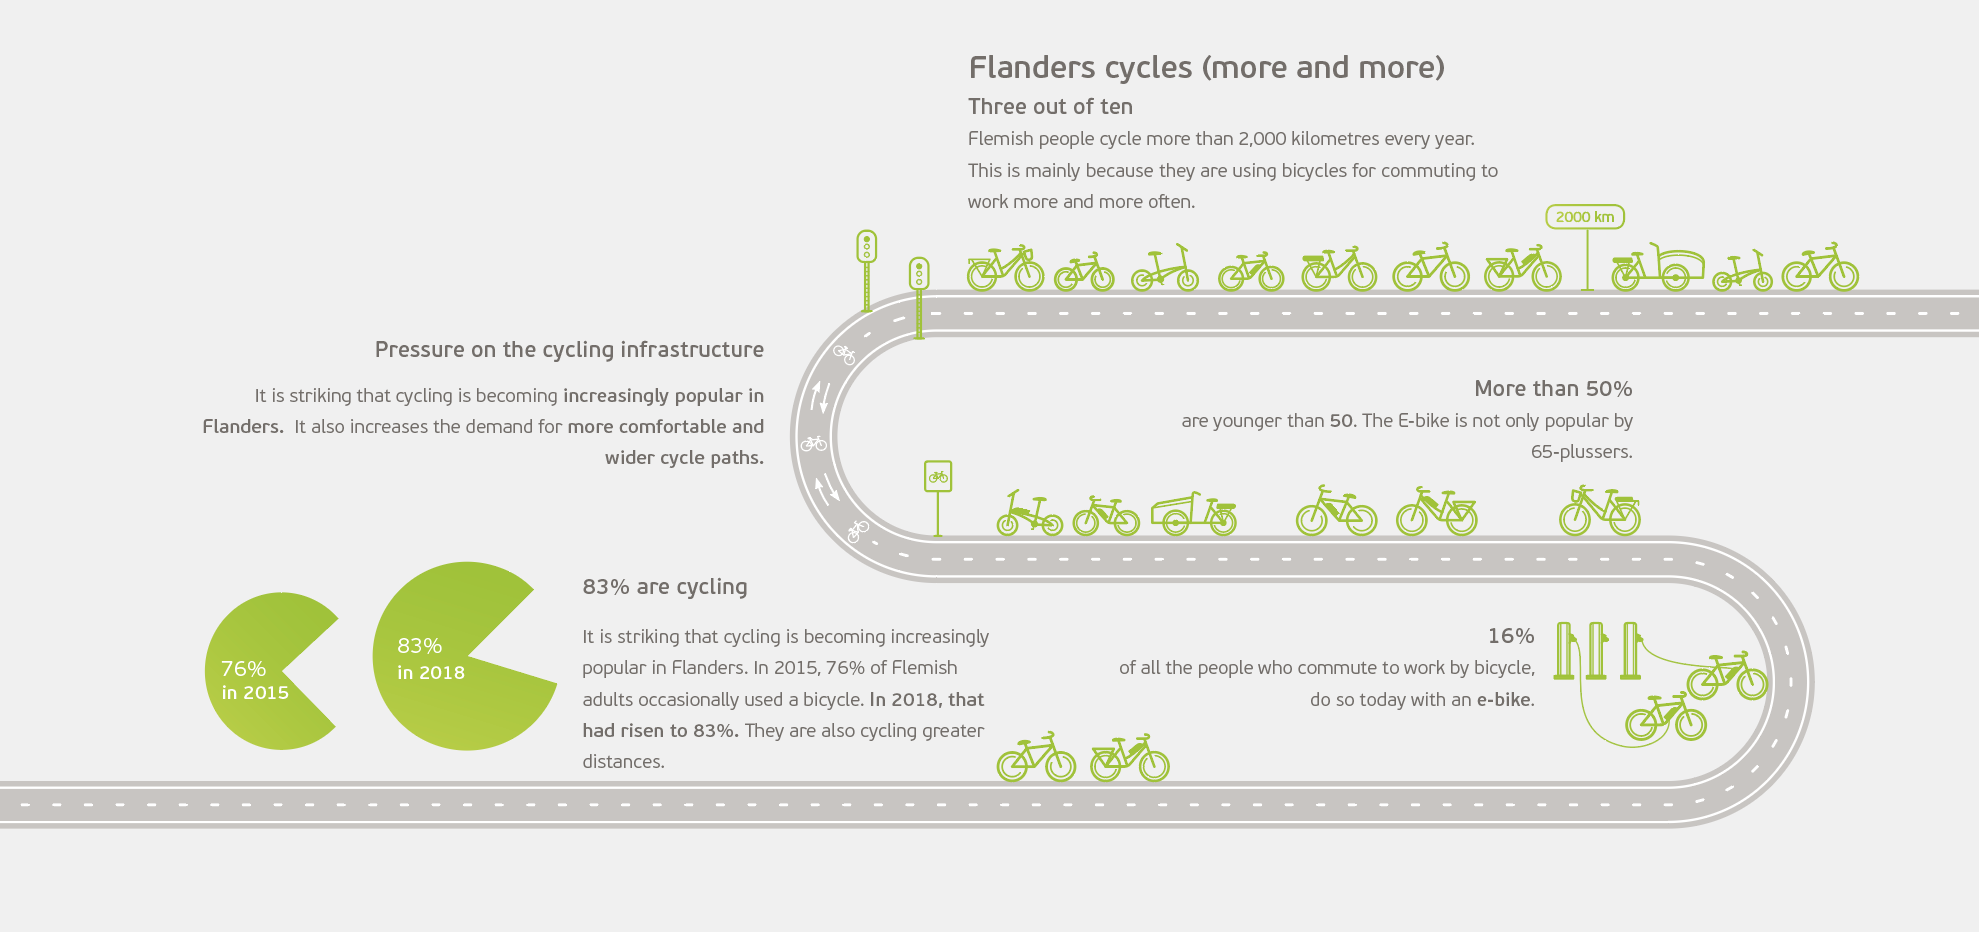 Flanders cycles (more and more)